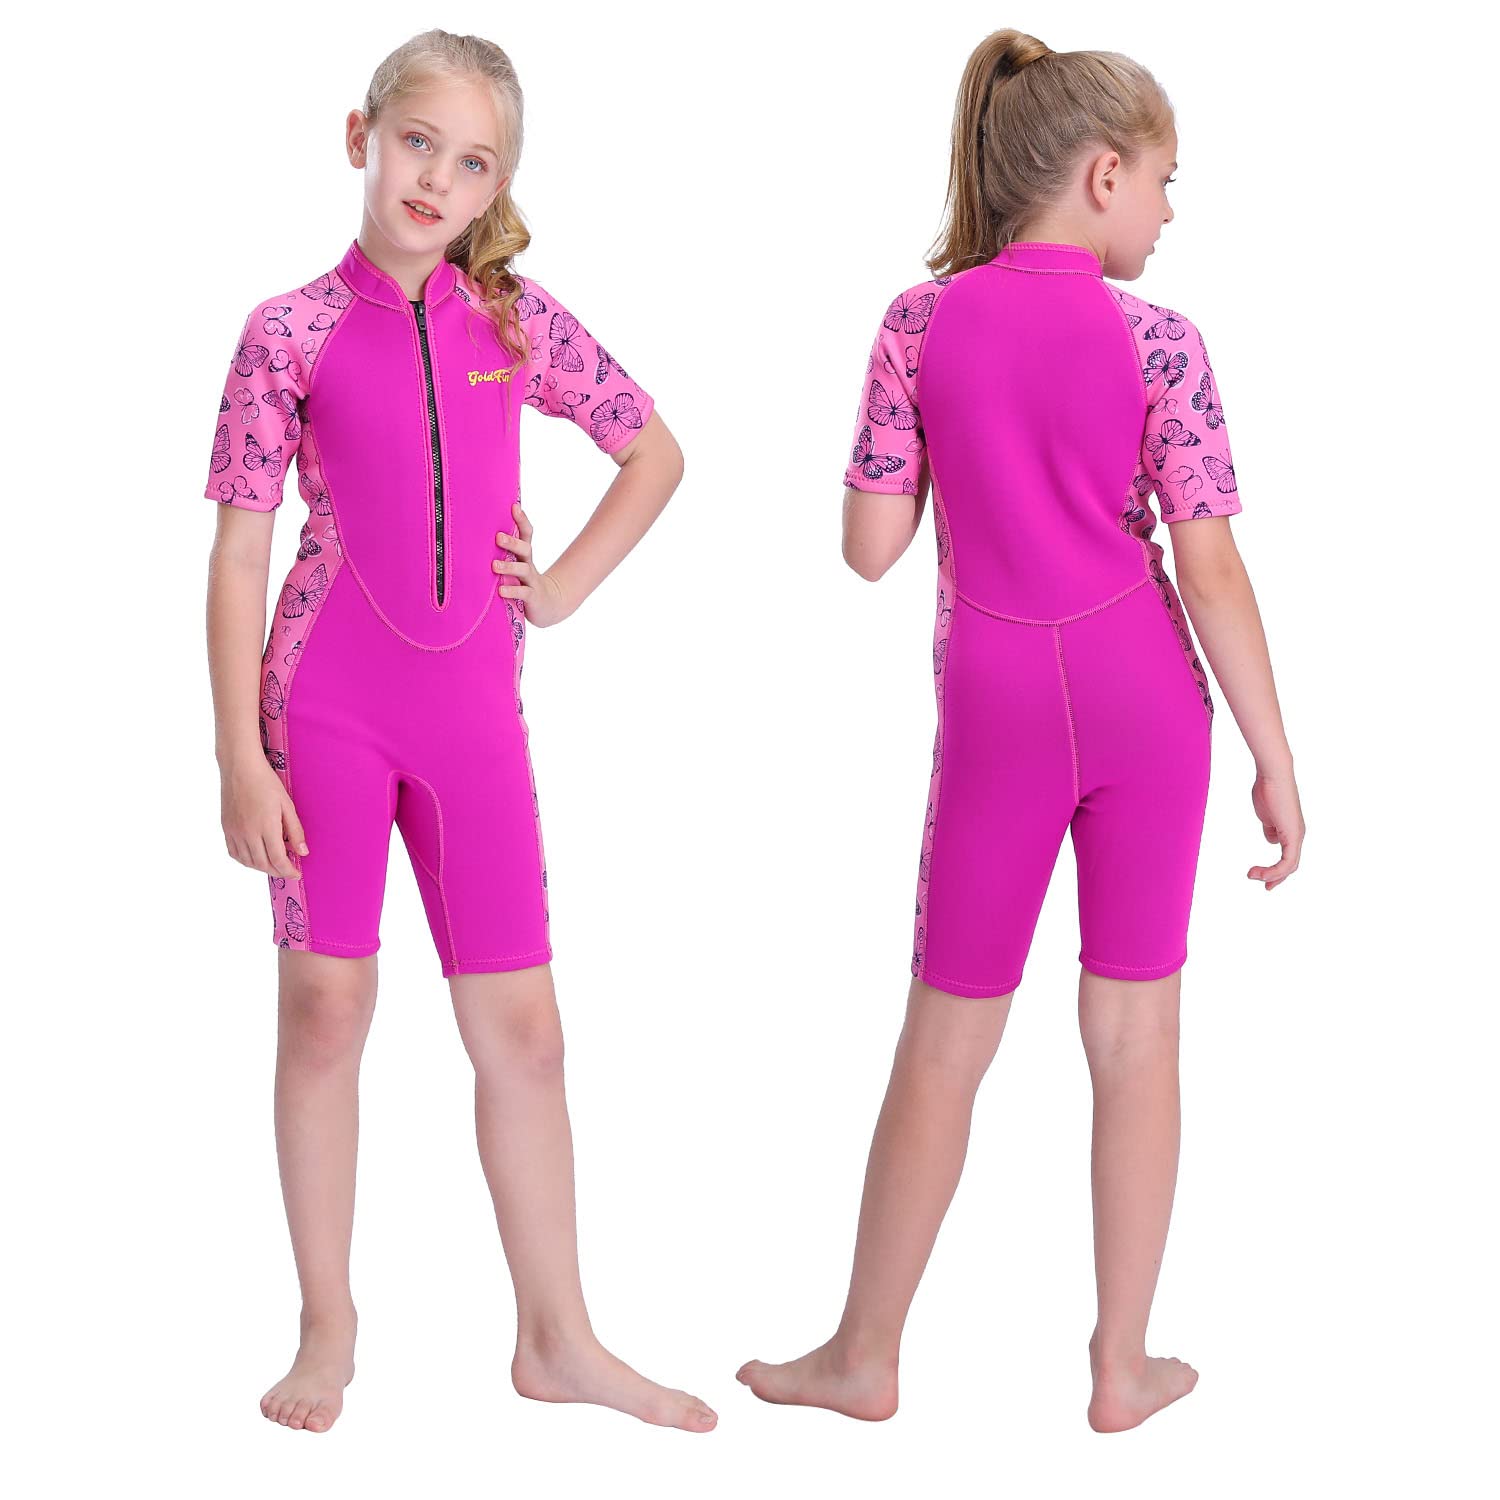 Goldfin Kids Wetsuits for Boys Girls, 2mm Toddler Shorty Wetsuit Youth Neoprene  Suit Front Zip Keep Warm for Water Aerobics Diving Surfing Swimming, Rash  Guards -  Canada